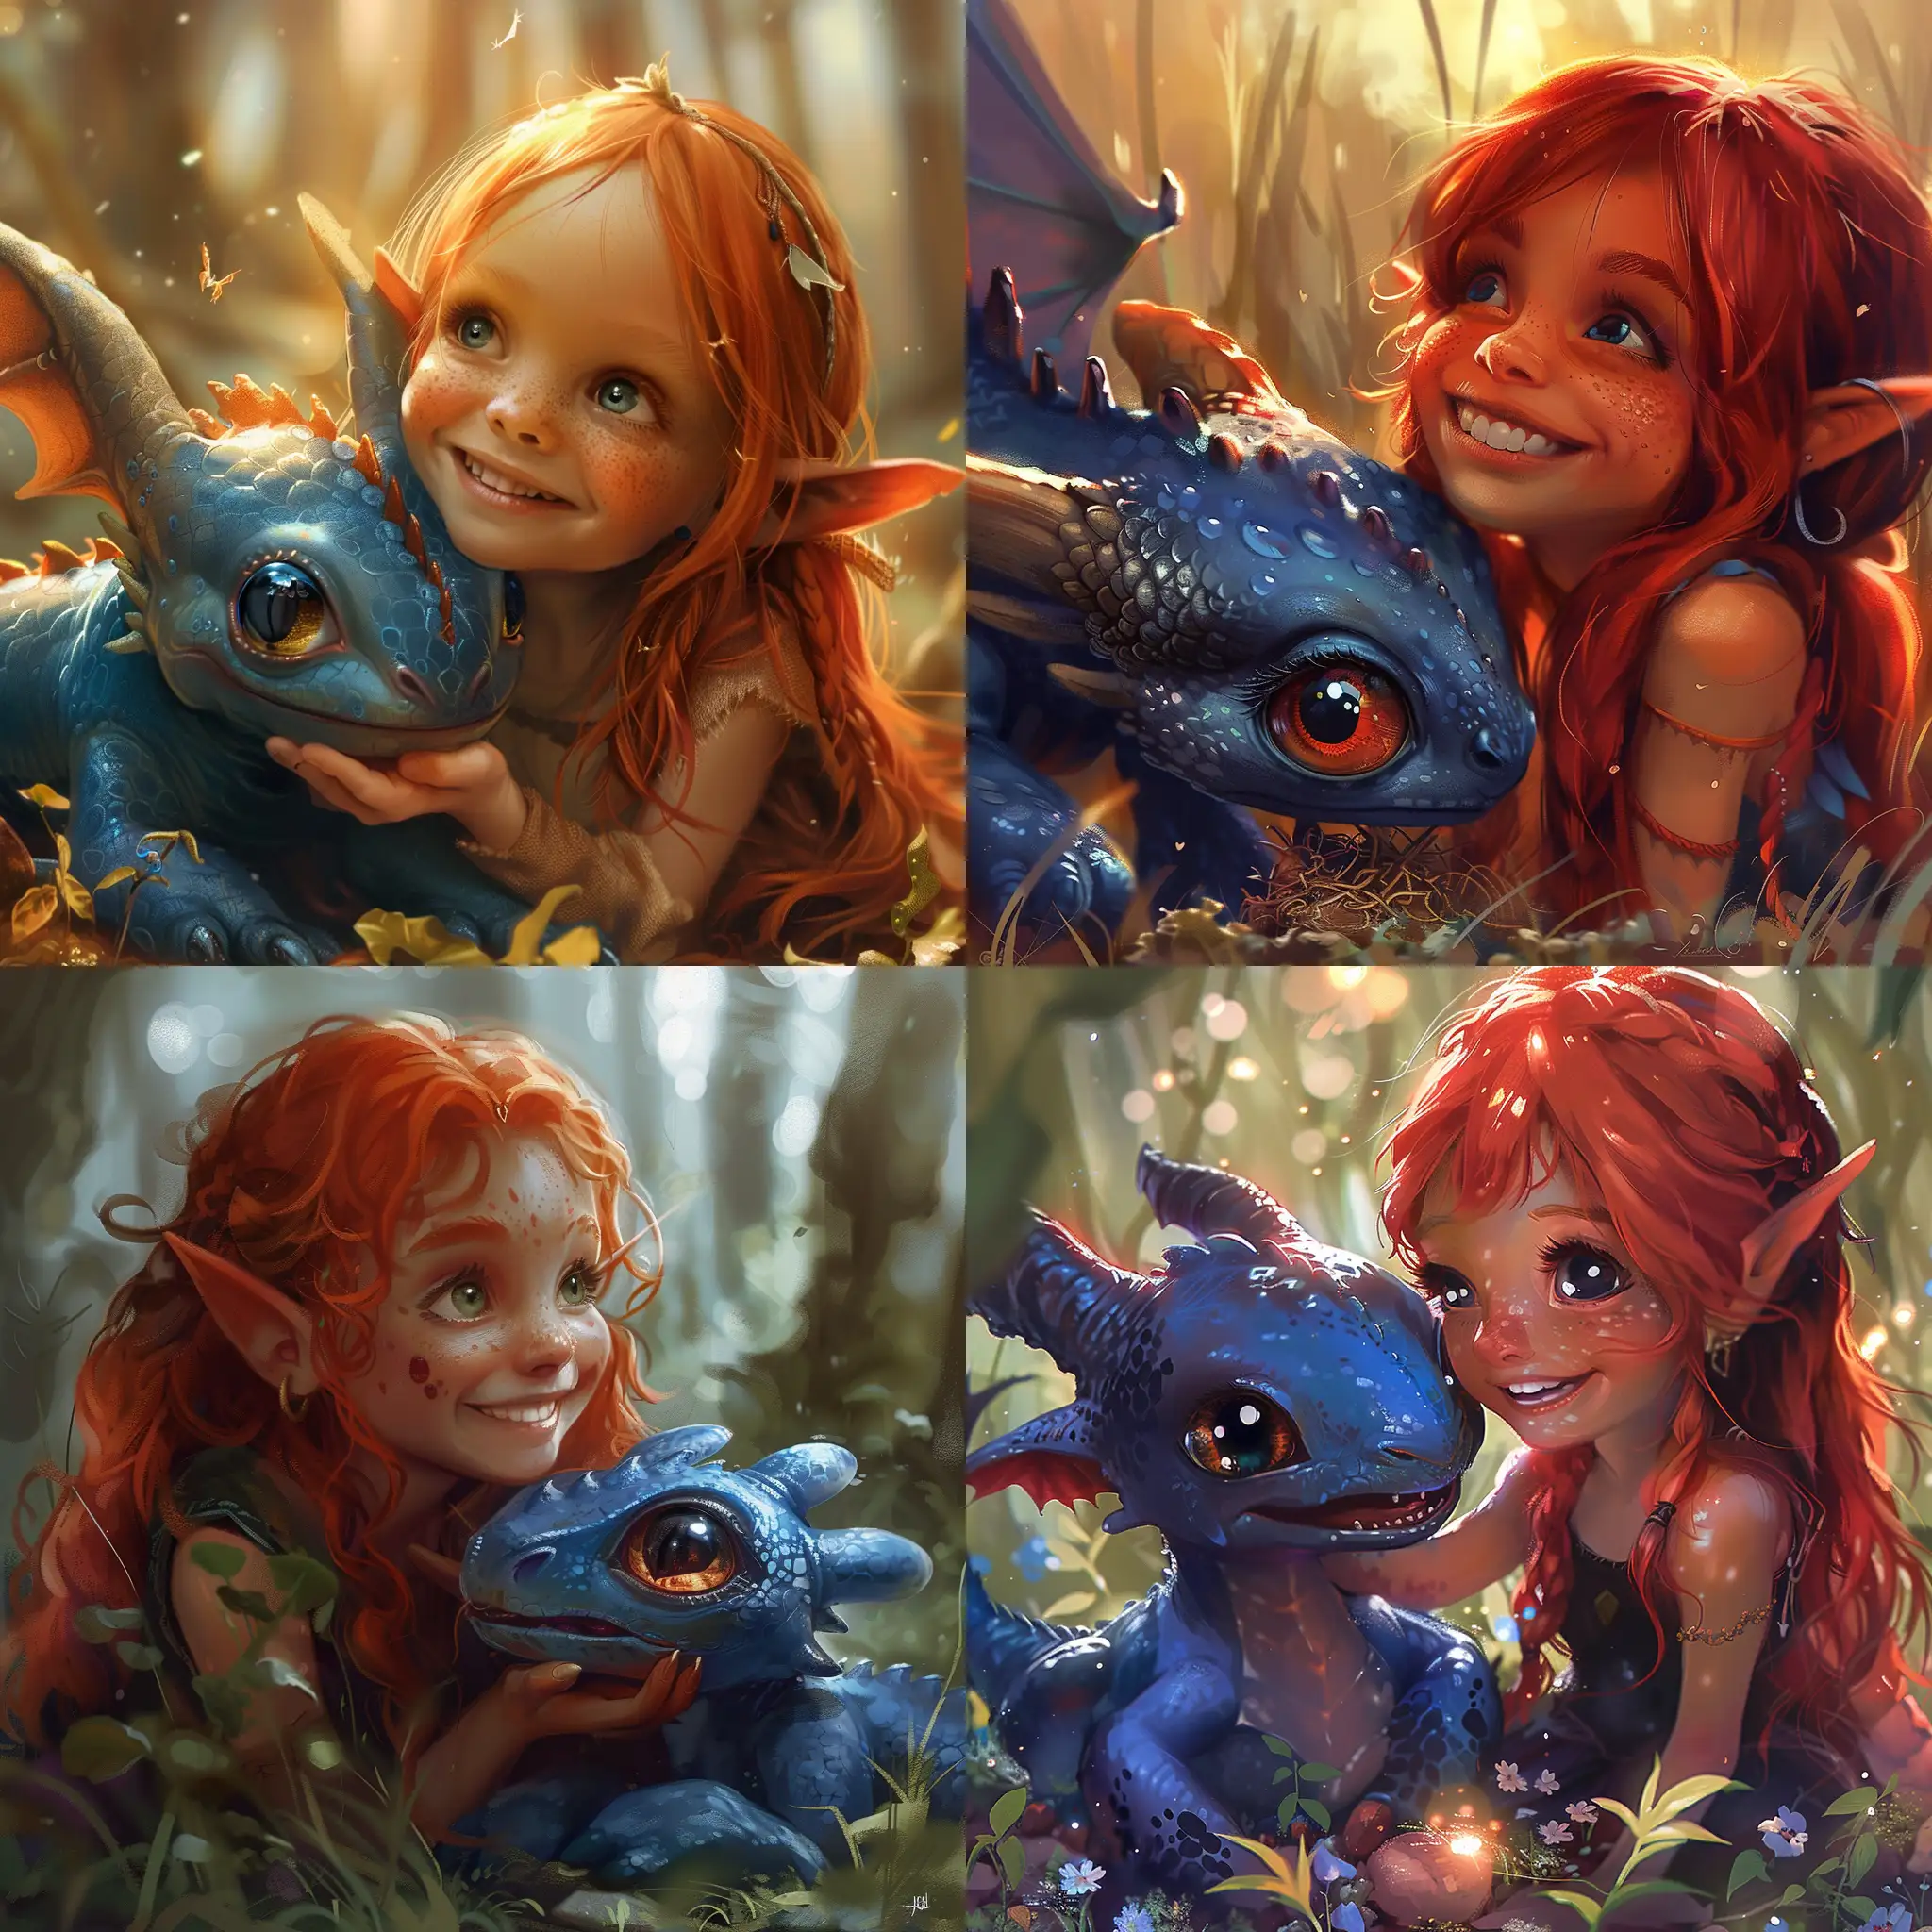 Enchanting-RedHaired-Elf-Girl-and-her-Playful-BlueEyed-Kindling-Dragon